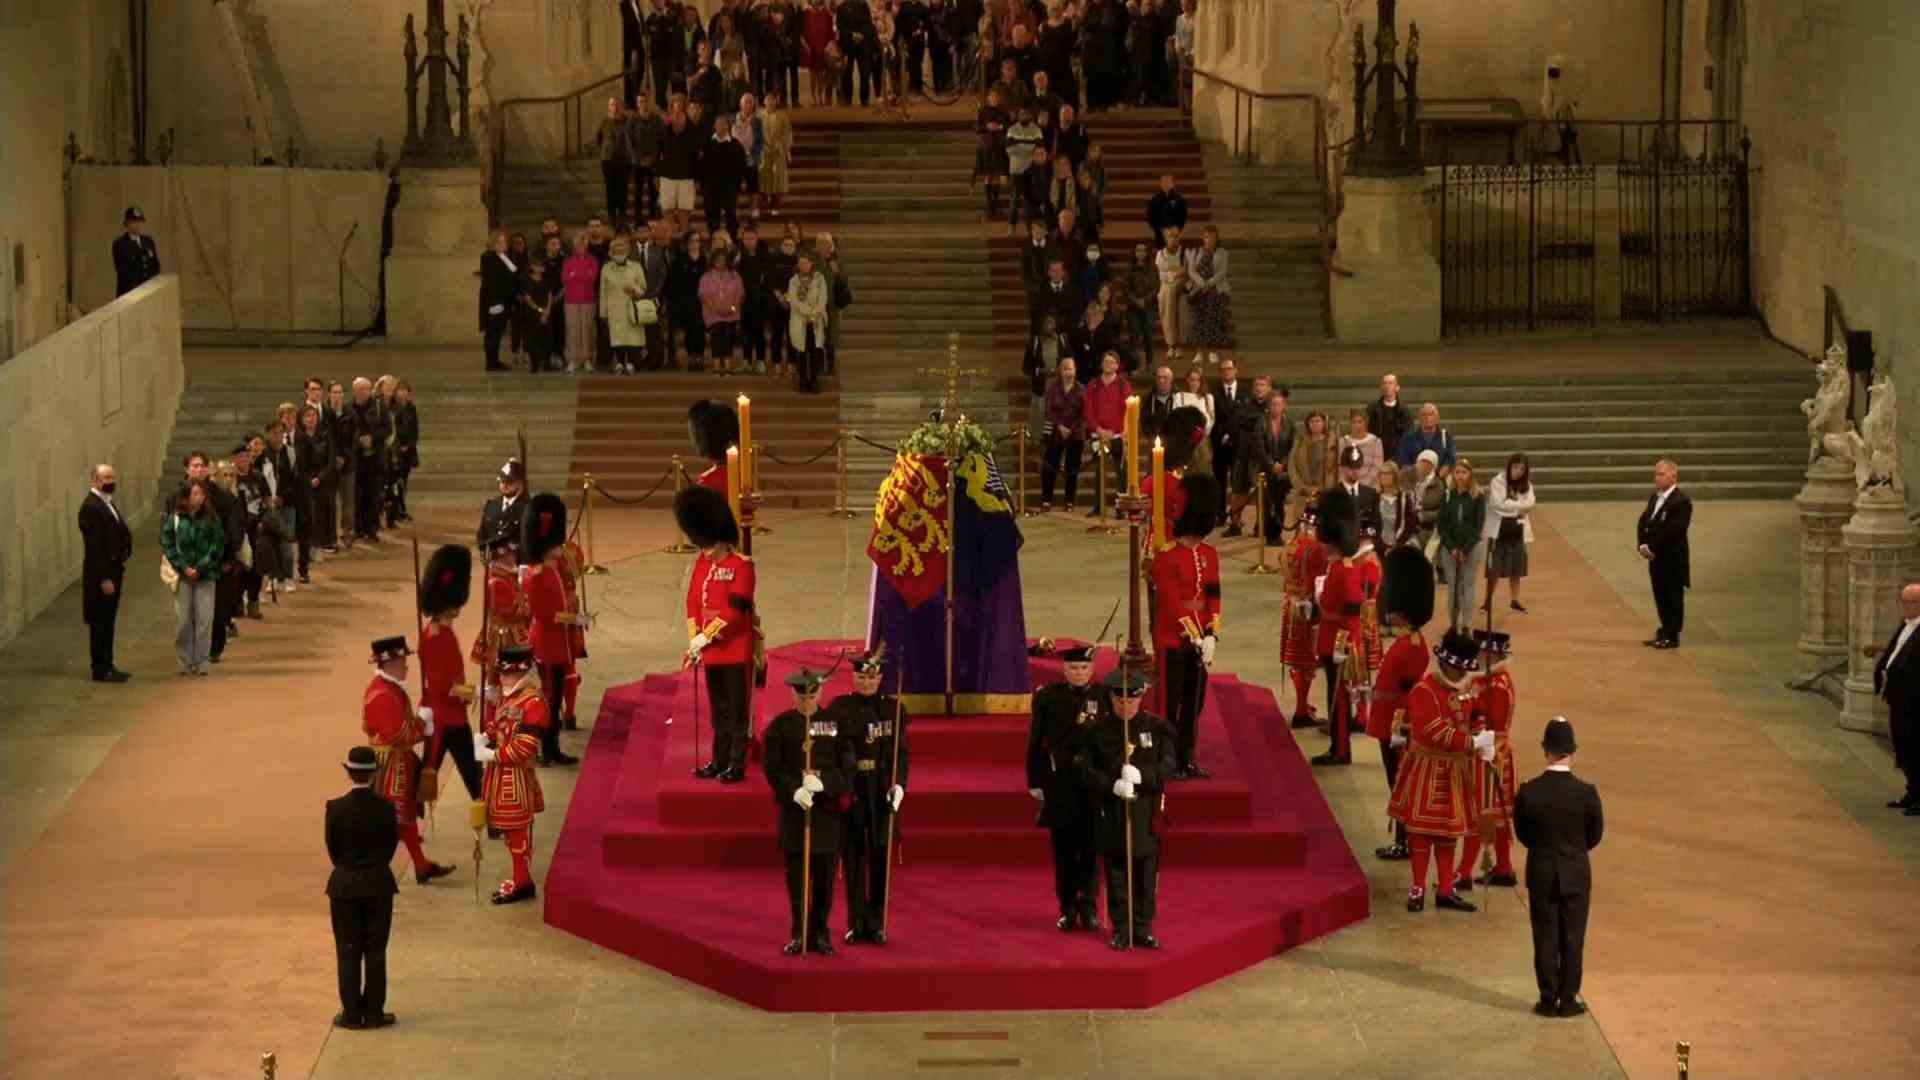 "We stood in line for six/seven hours" Rush to the Queen's coffin